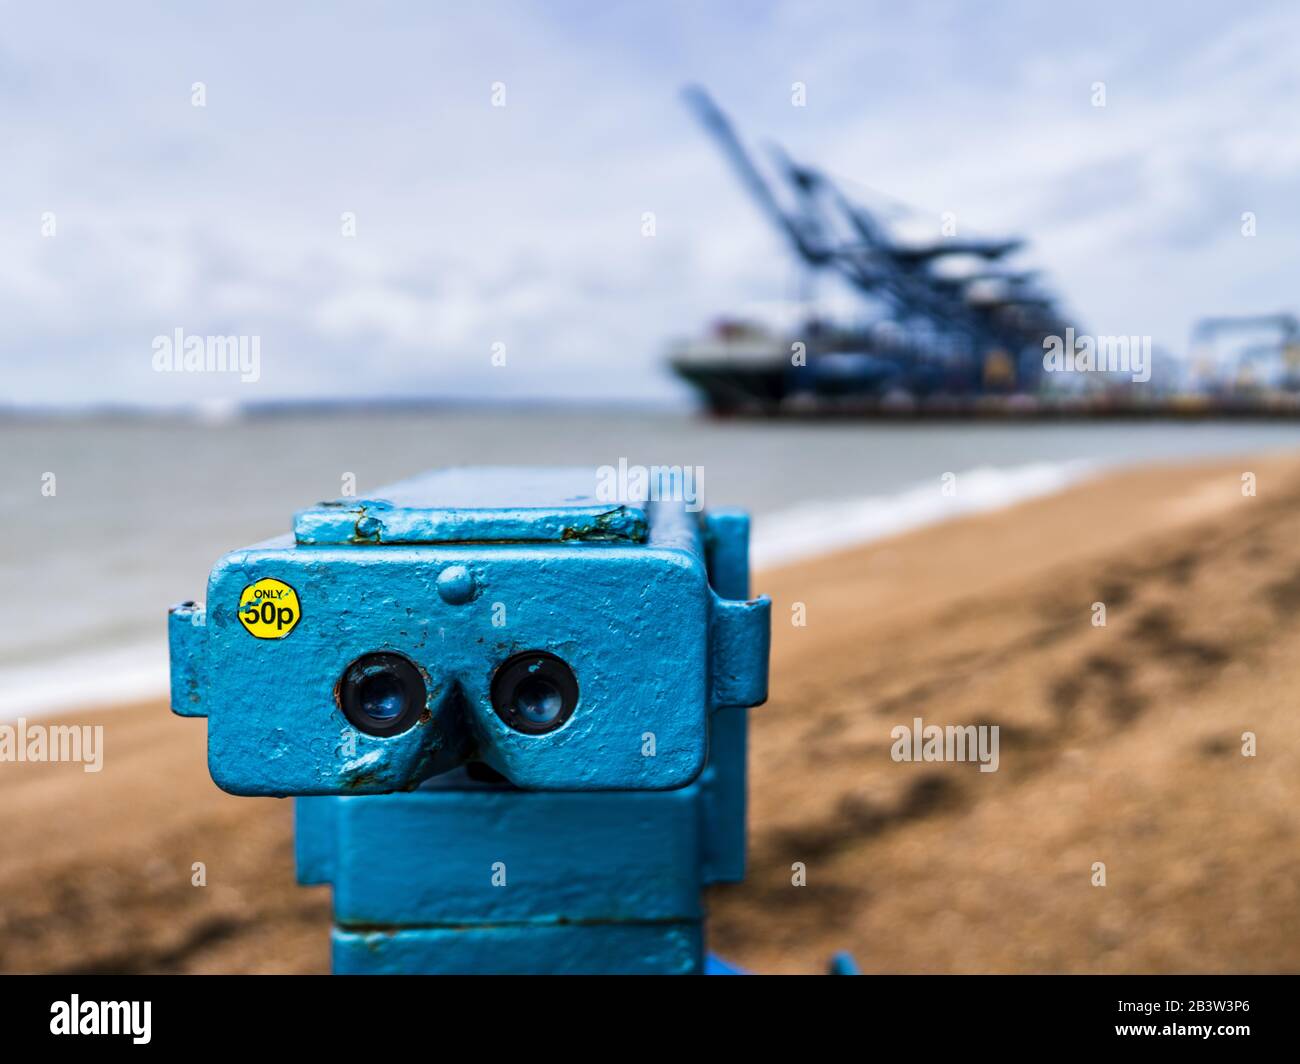 A View on International Trade - A look at Trade -  a beach telescope points at ships unloaded at Felixstowe Port. Stock Photo